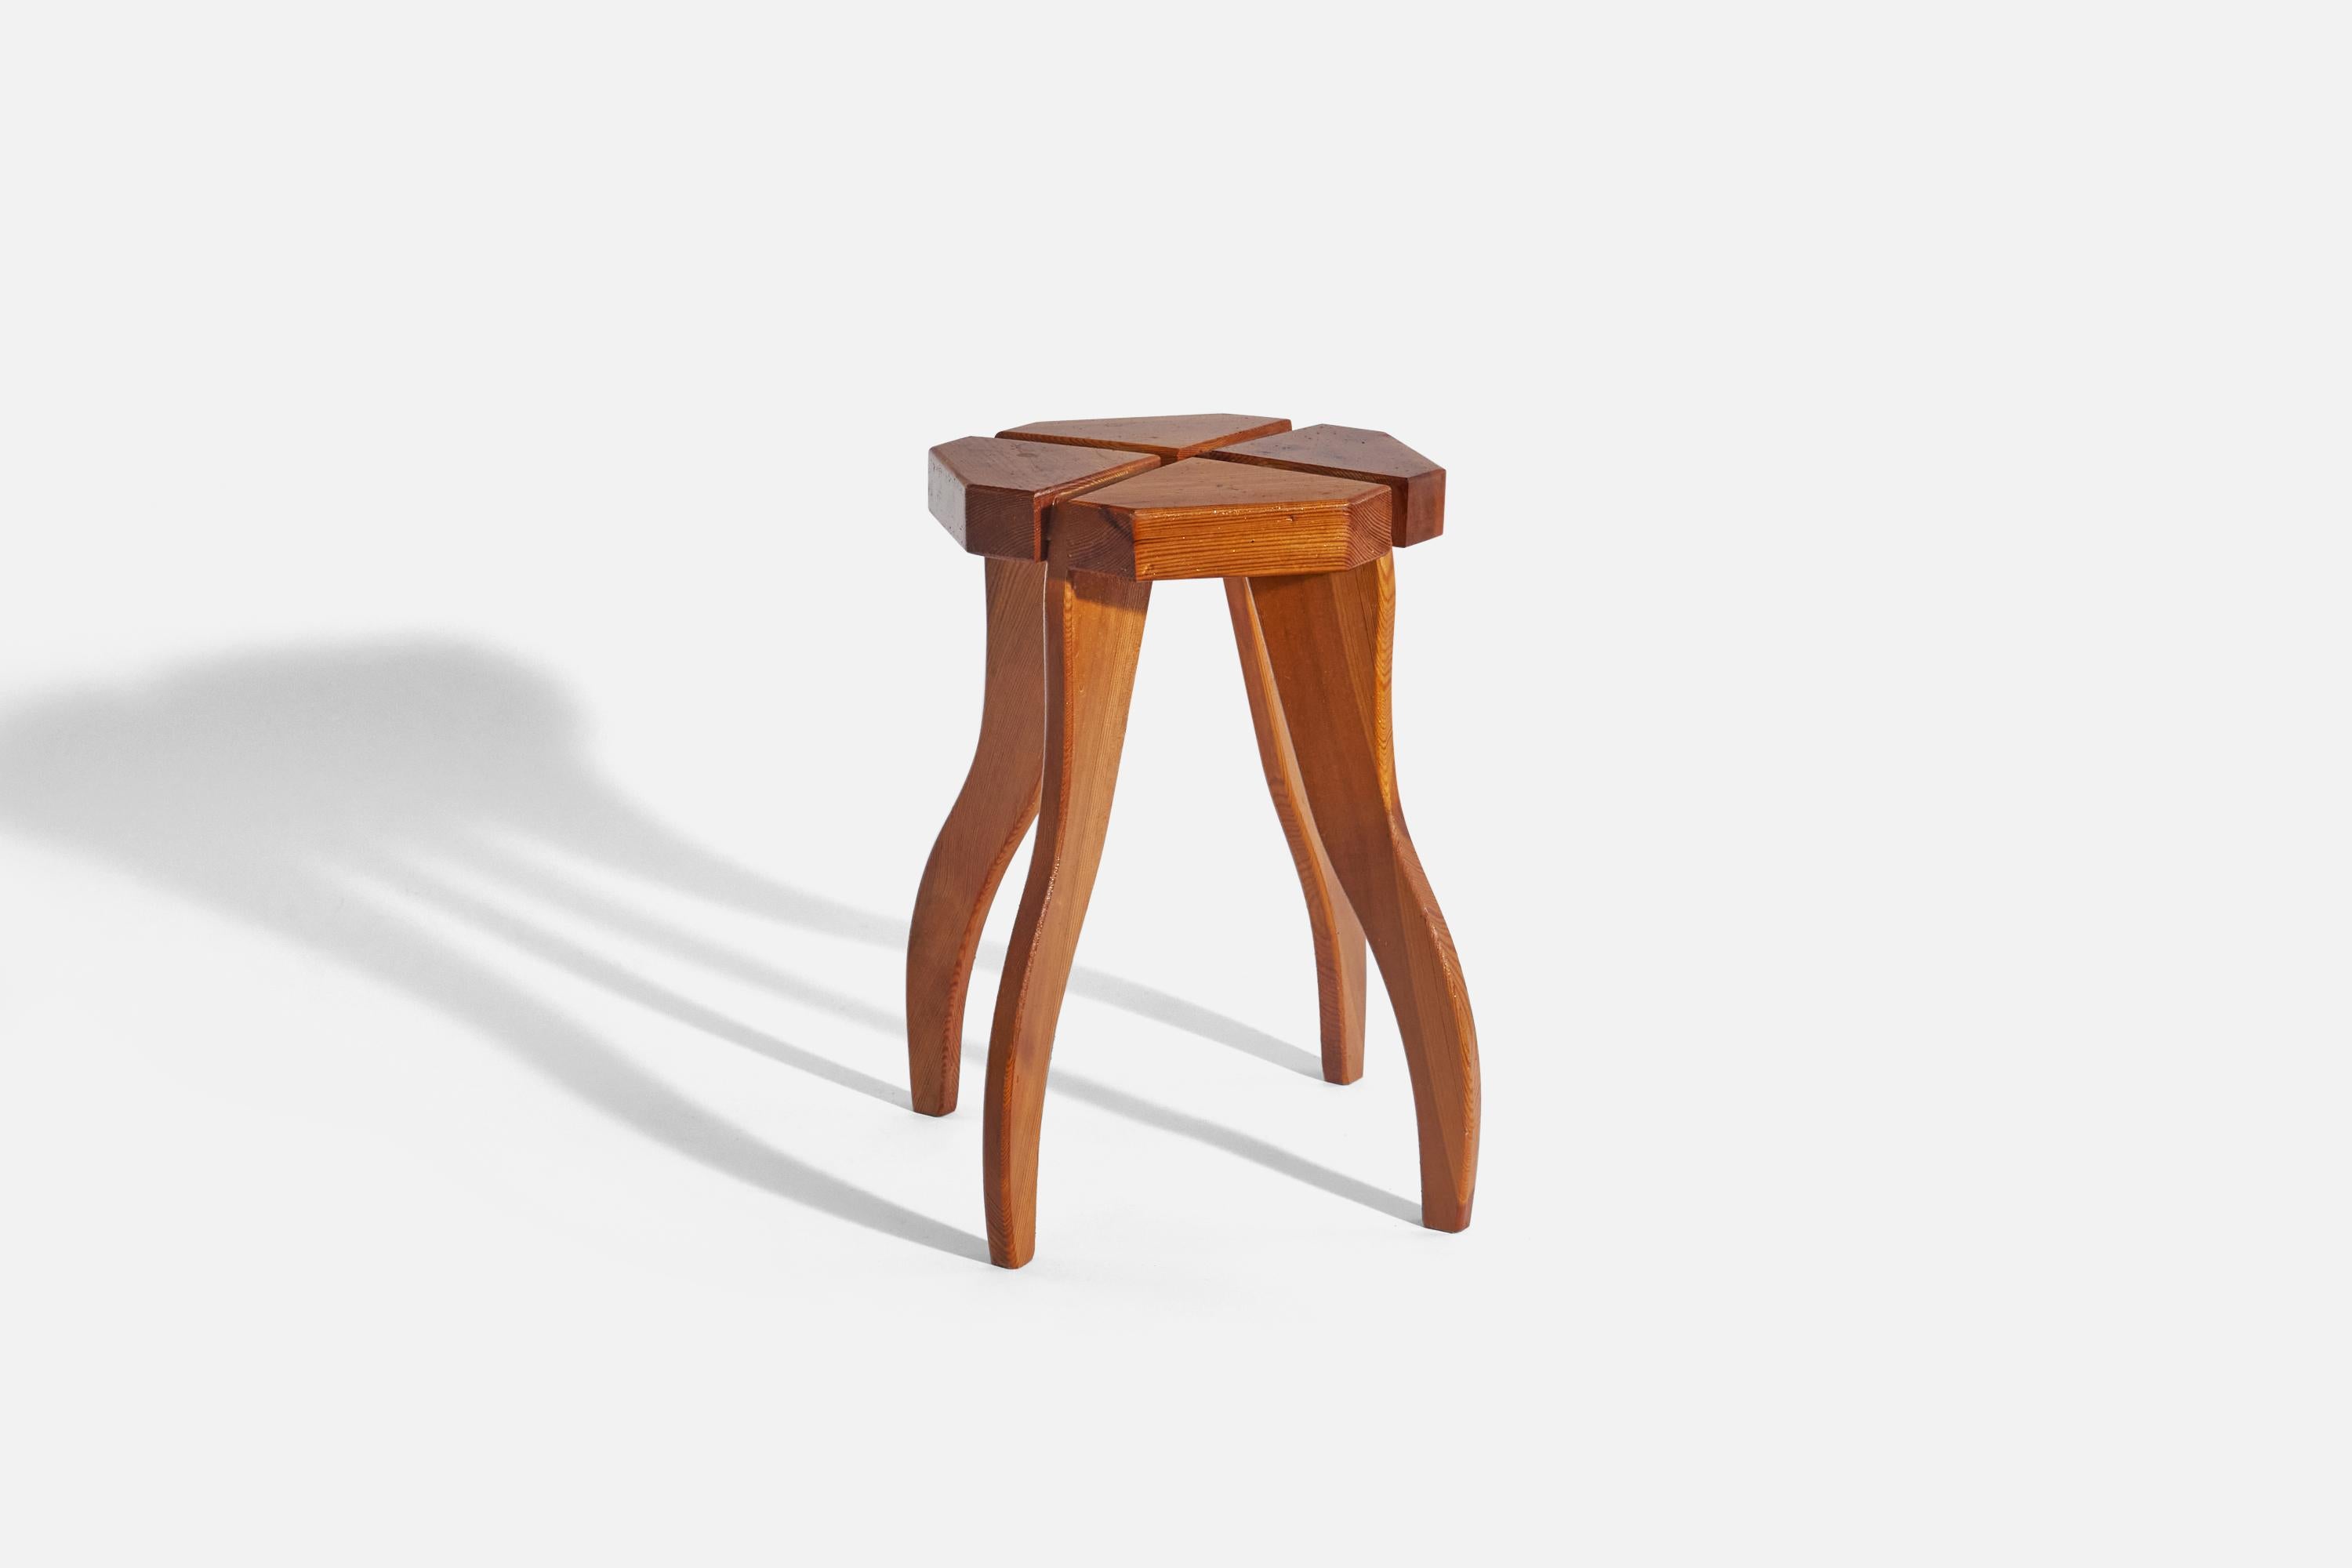 A solid pine stool designed and produced in Sweden, c. 1970s.